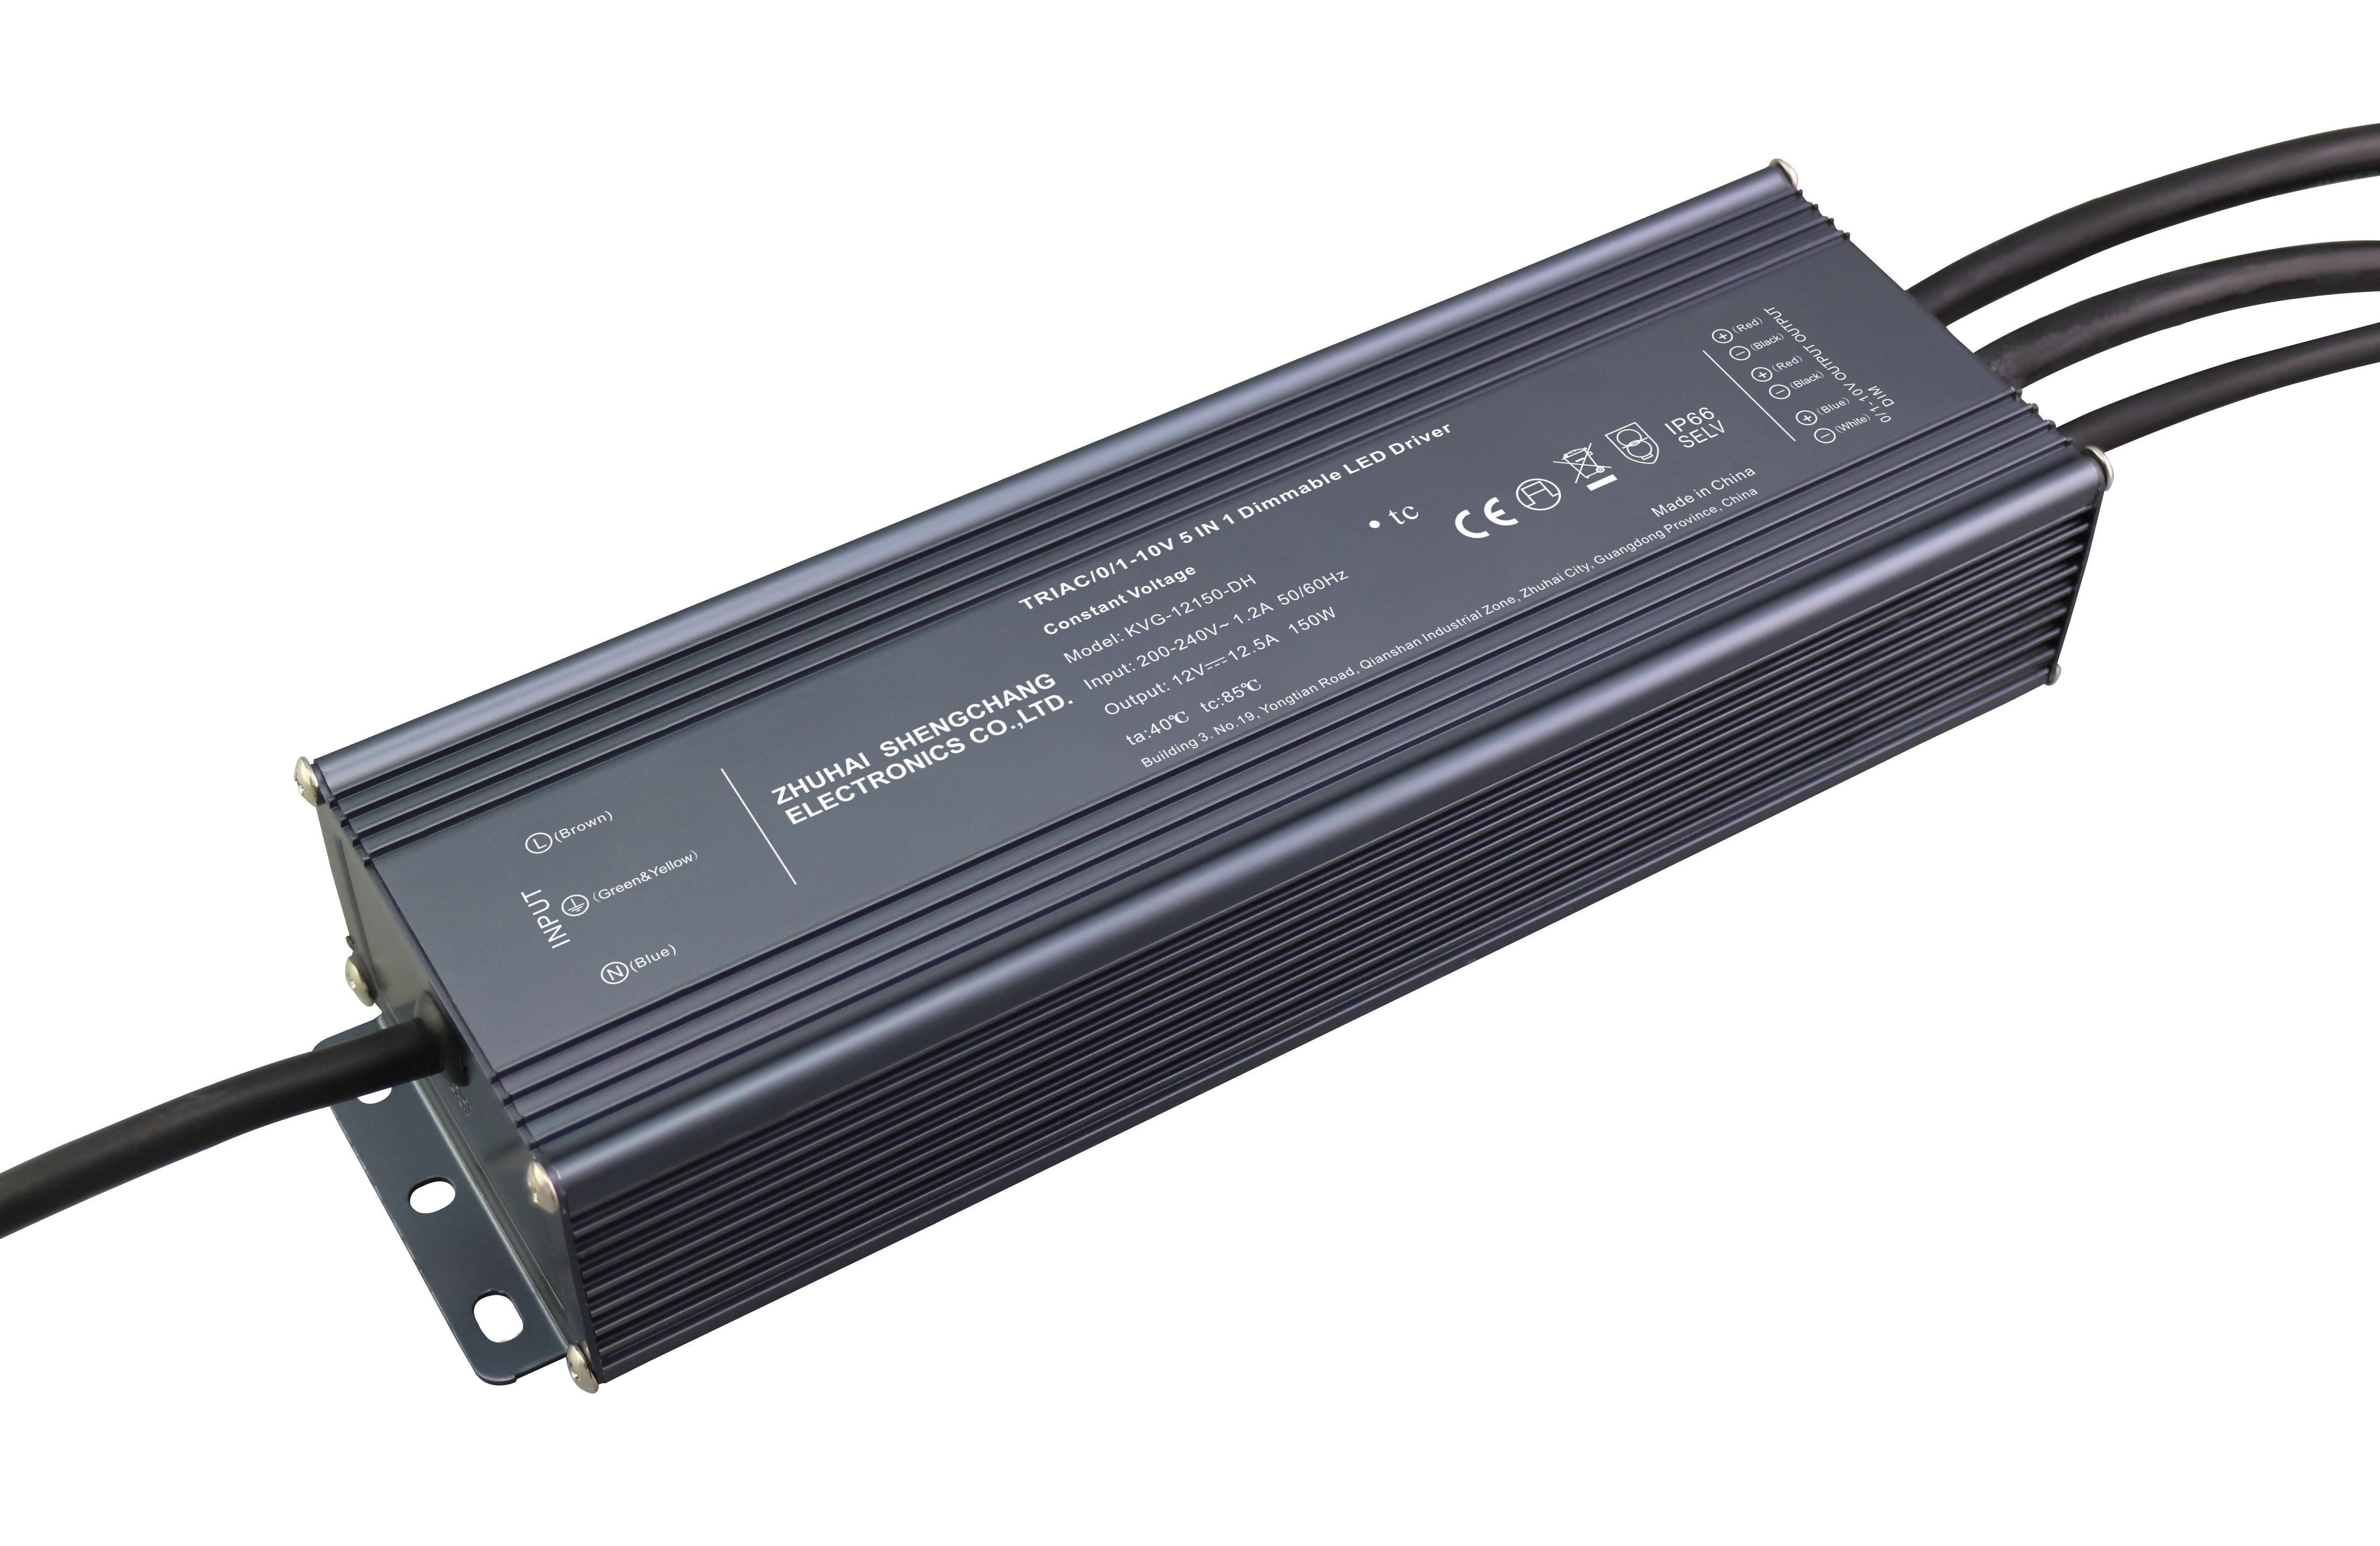 KVG-DH Series 150W Constant Voltage Triac&0/1-10V Dimmable LED driver